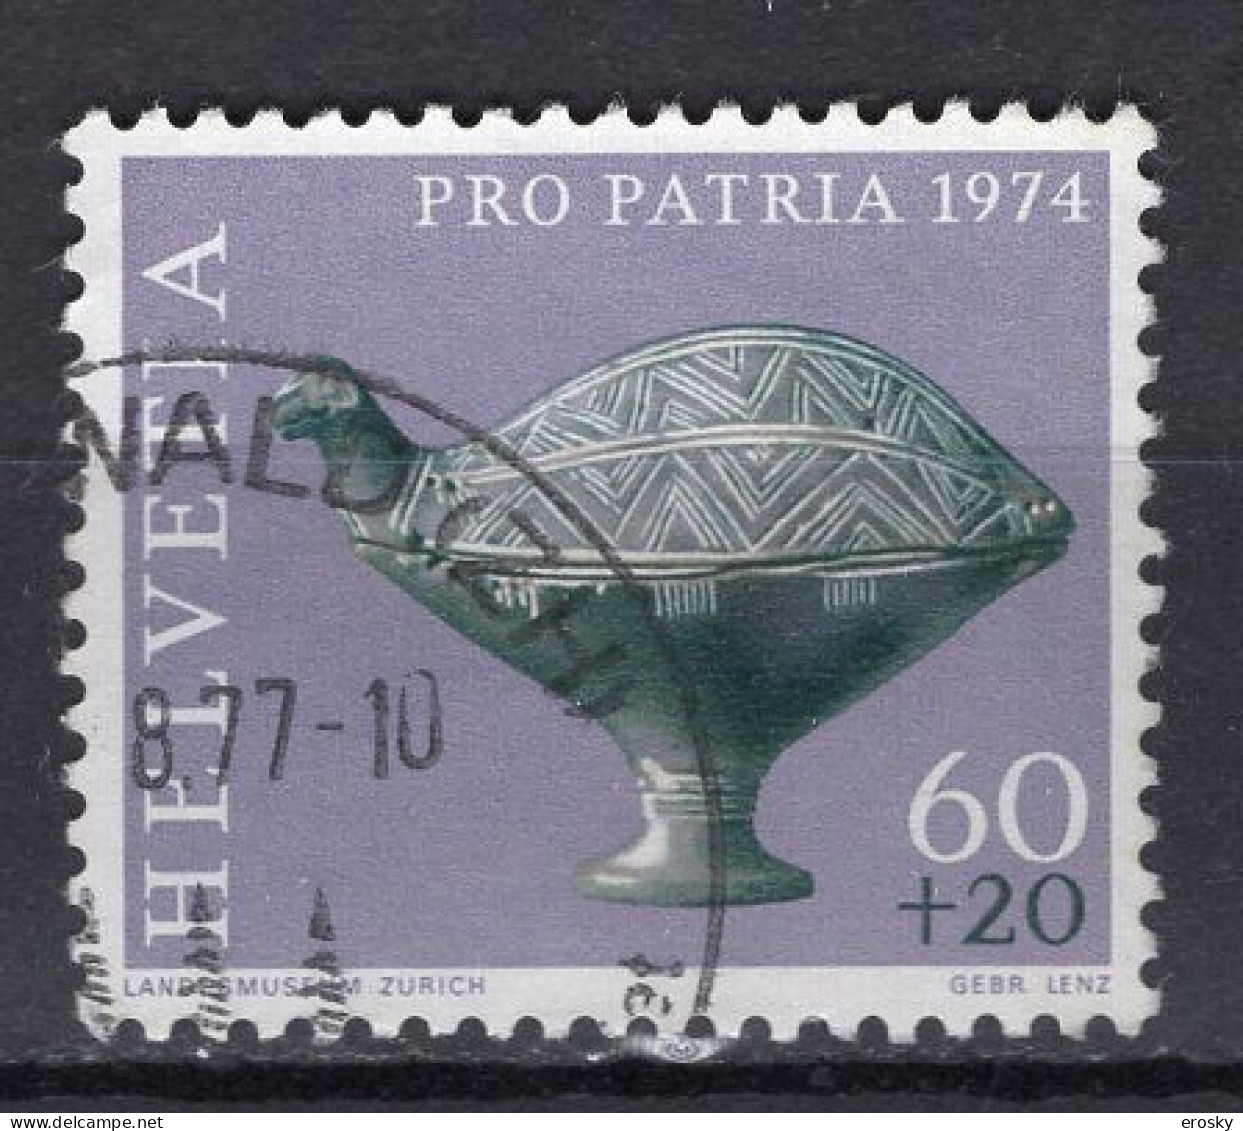 T3202 - SUISSE SWITZERLAND Yv N°964 Pro Patria Fete Nationale - Used Stamps